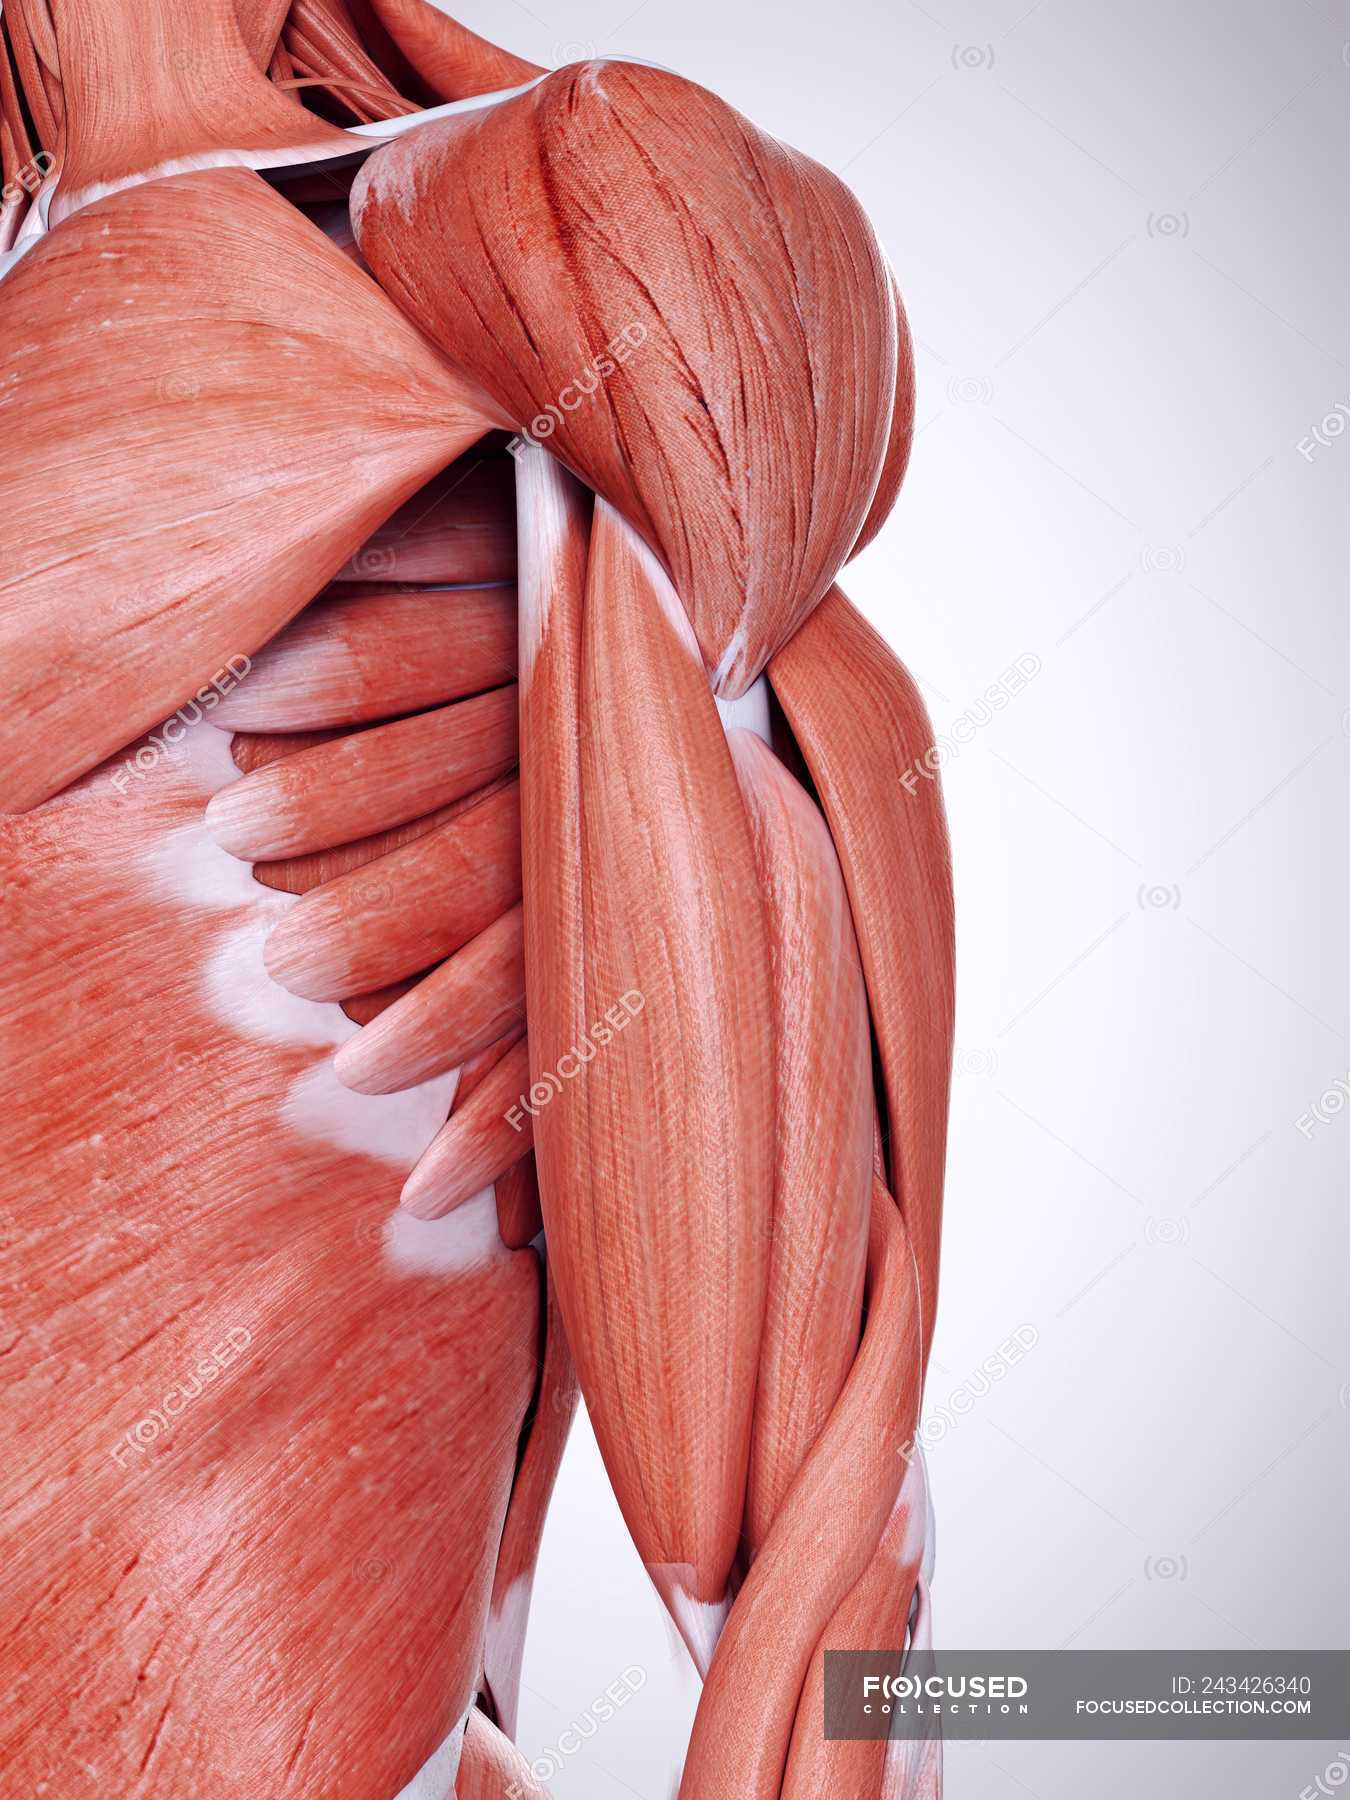 3d rendered illustration of upper arm muscles in human ...